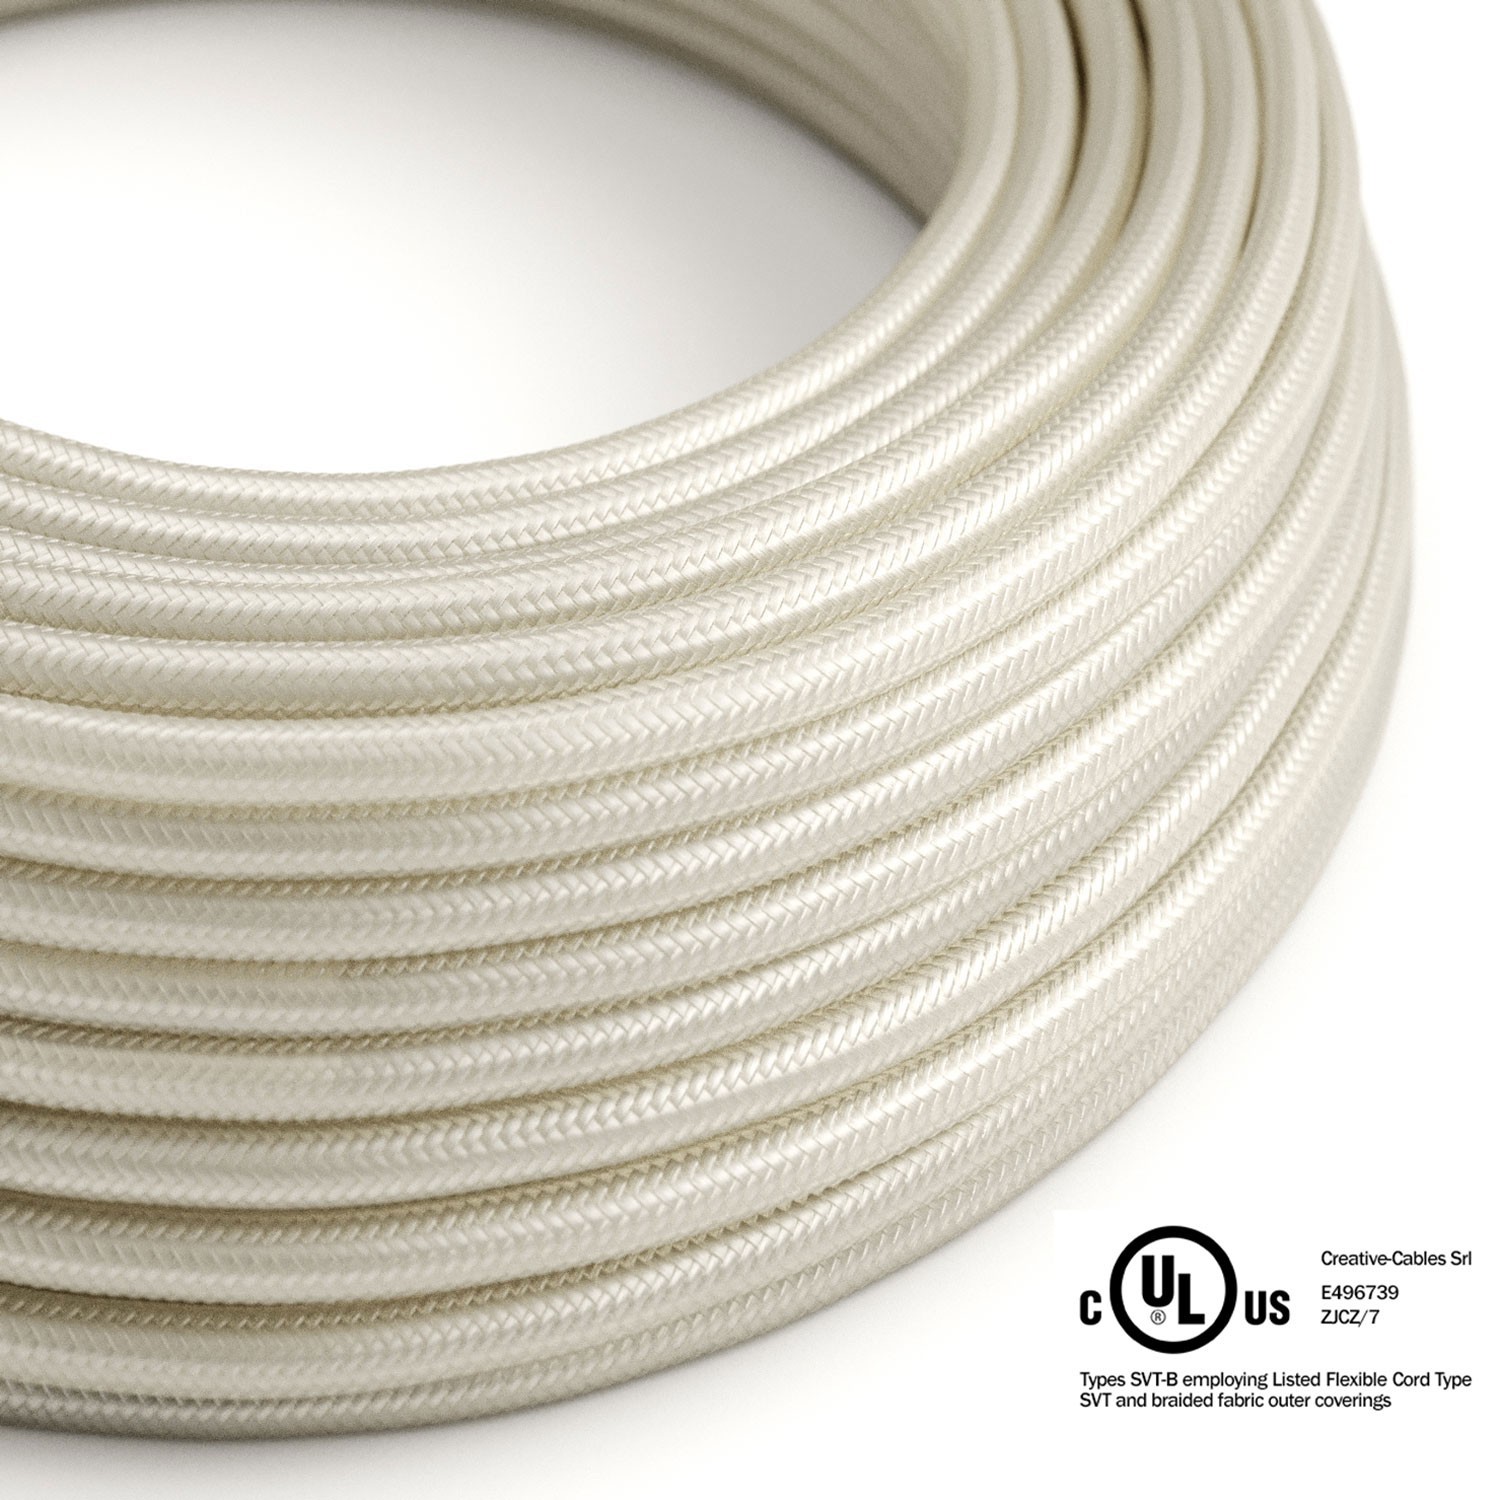 Round Electric Cable 150 ft (45,72 m) coil RM00 Ivory Rayon - UL listed